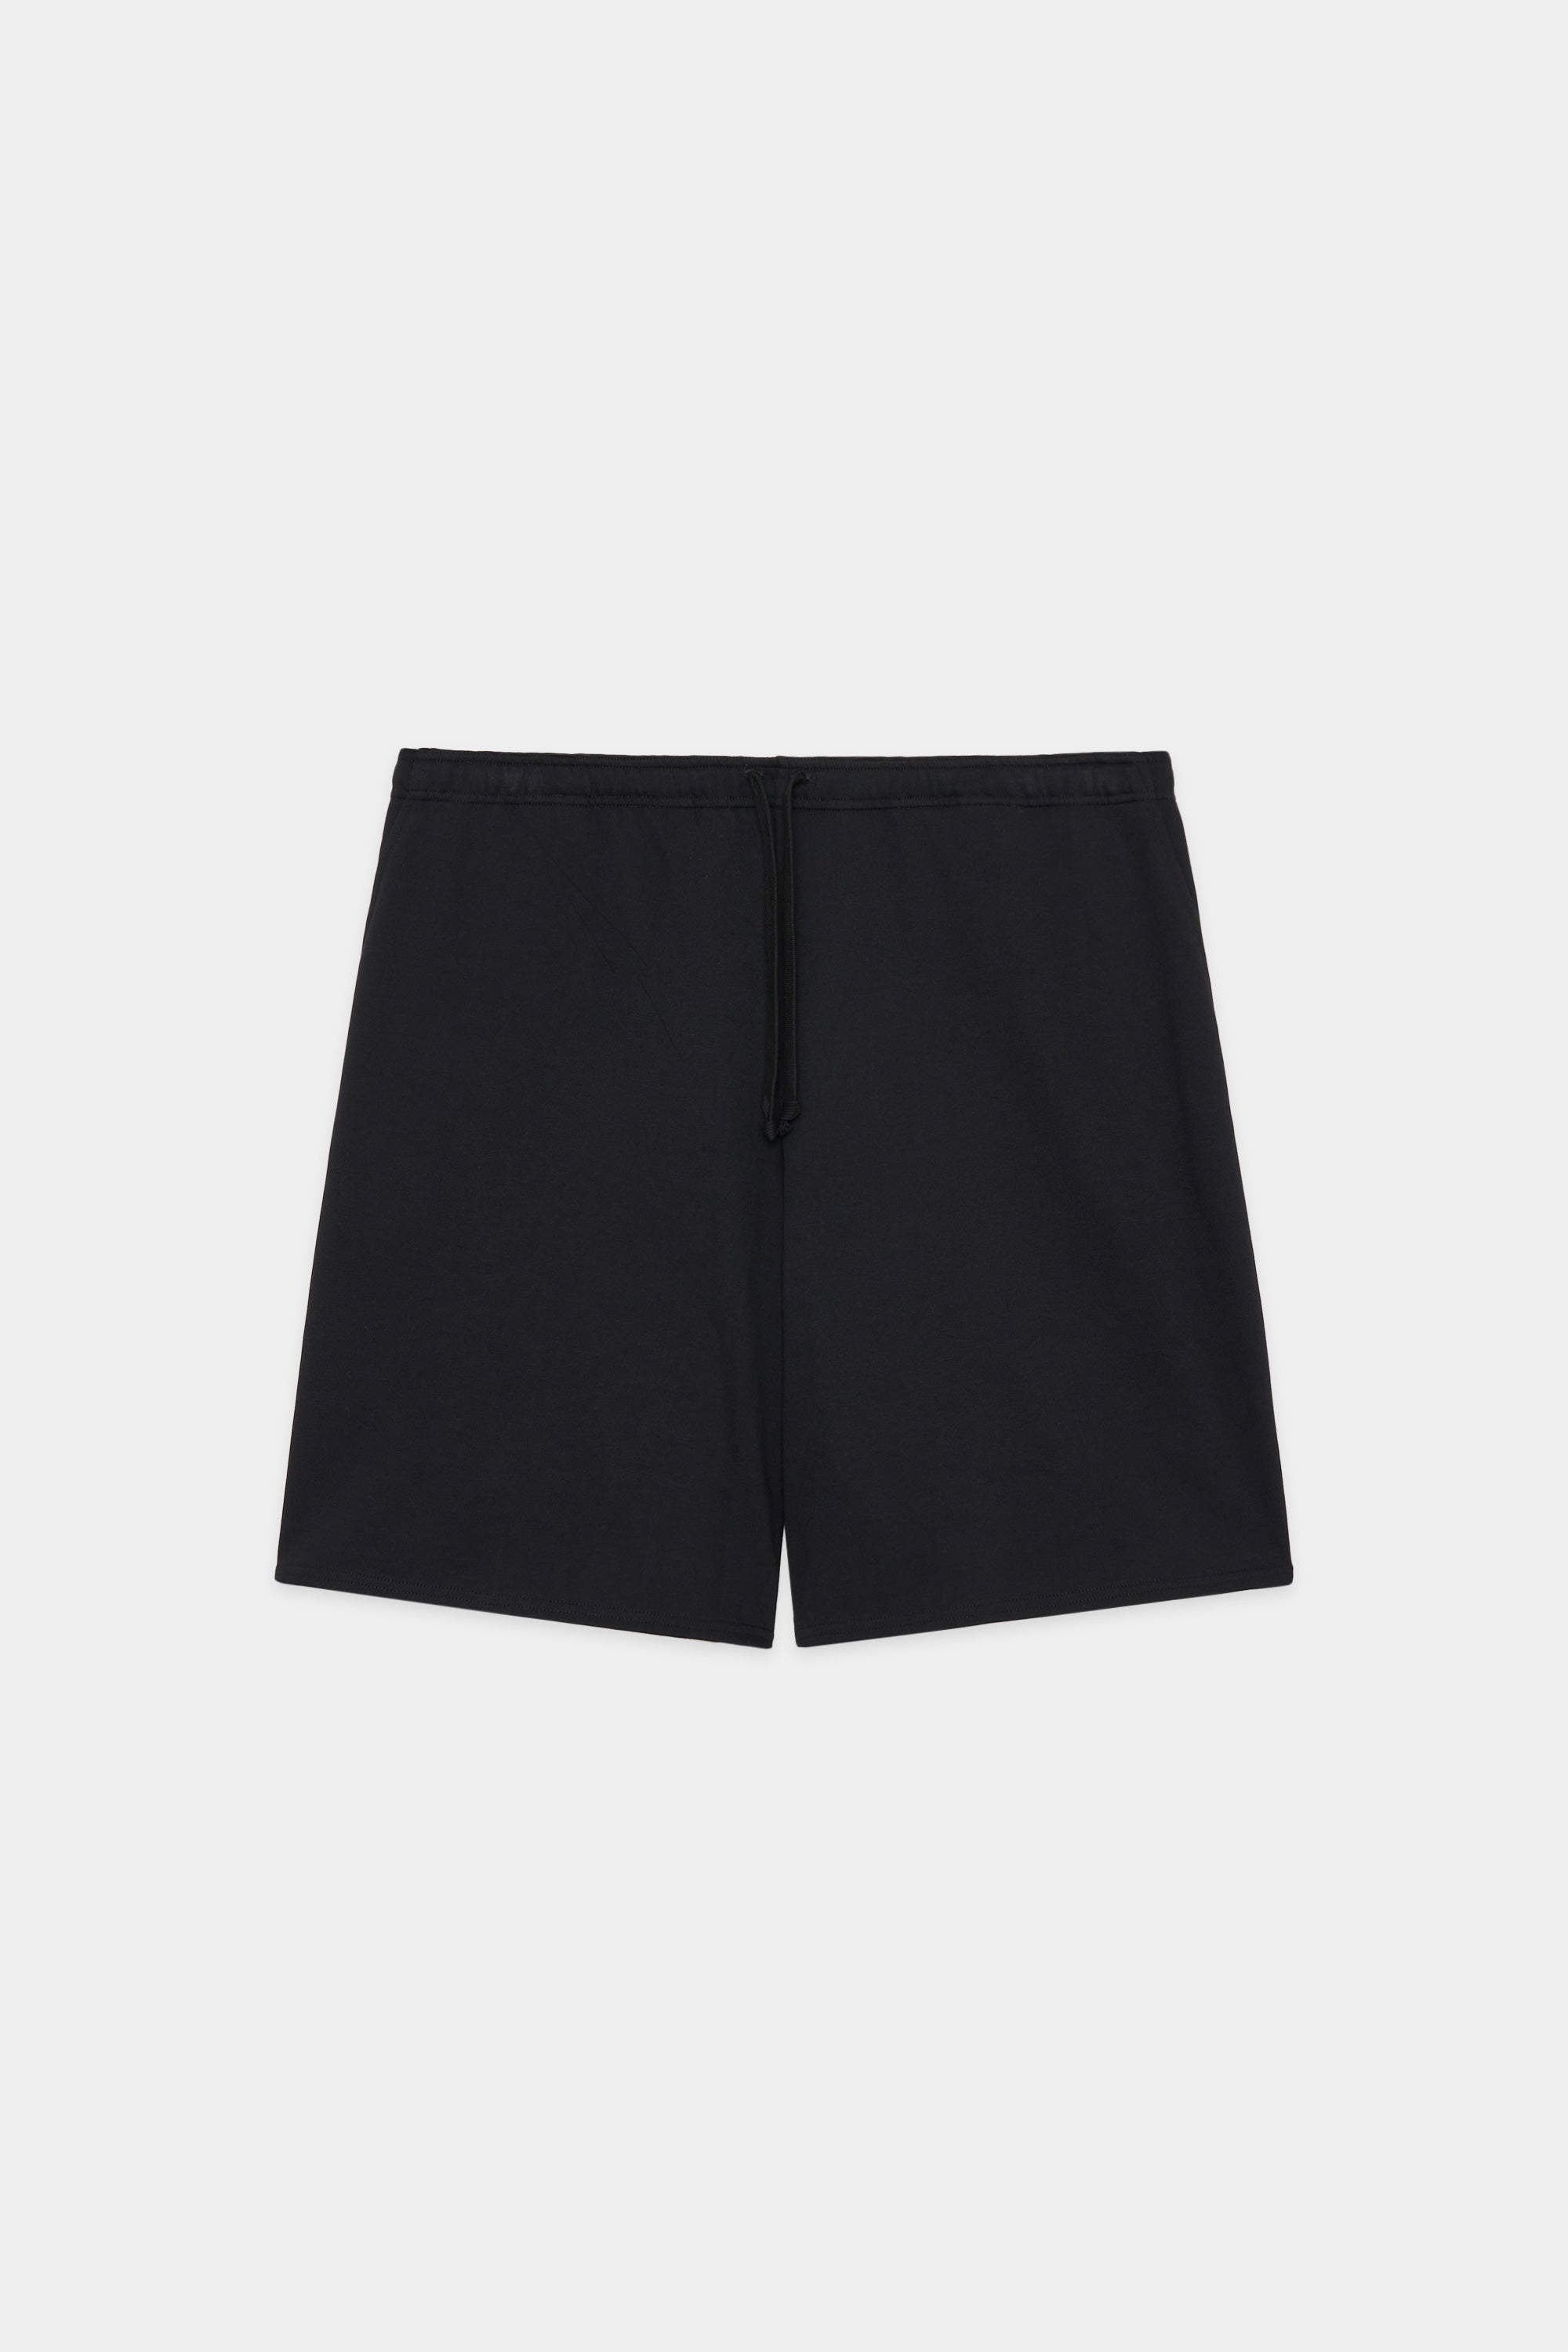 20//1 RECYCLE SUVIN ORGANIC COTTON KNIT EASY SHORTS, Black